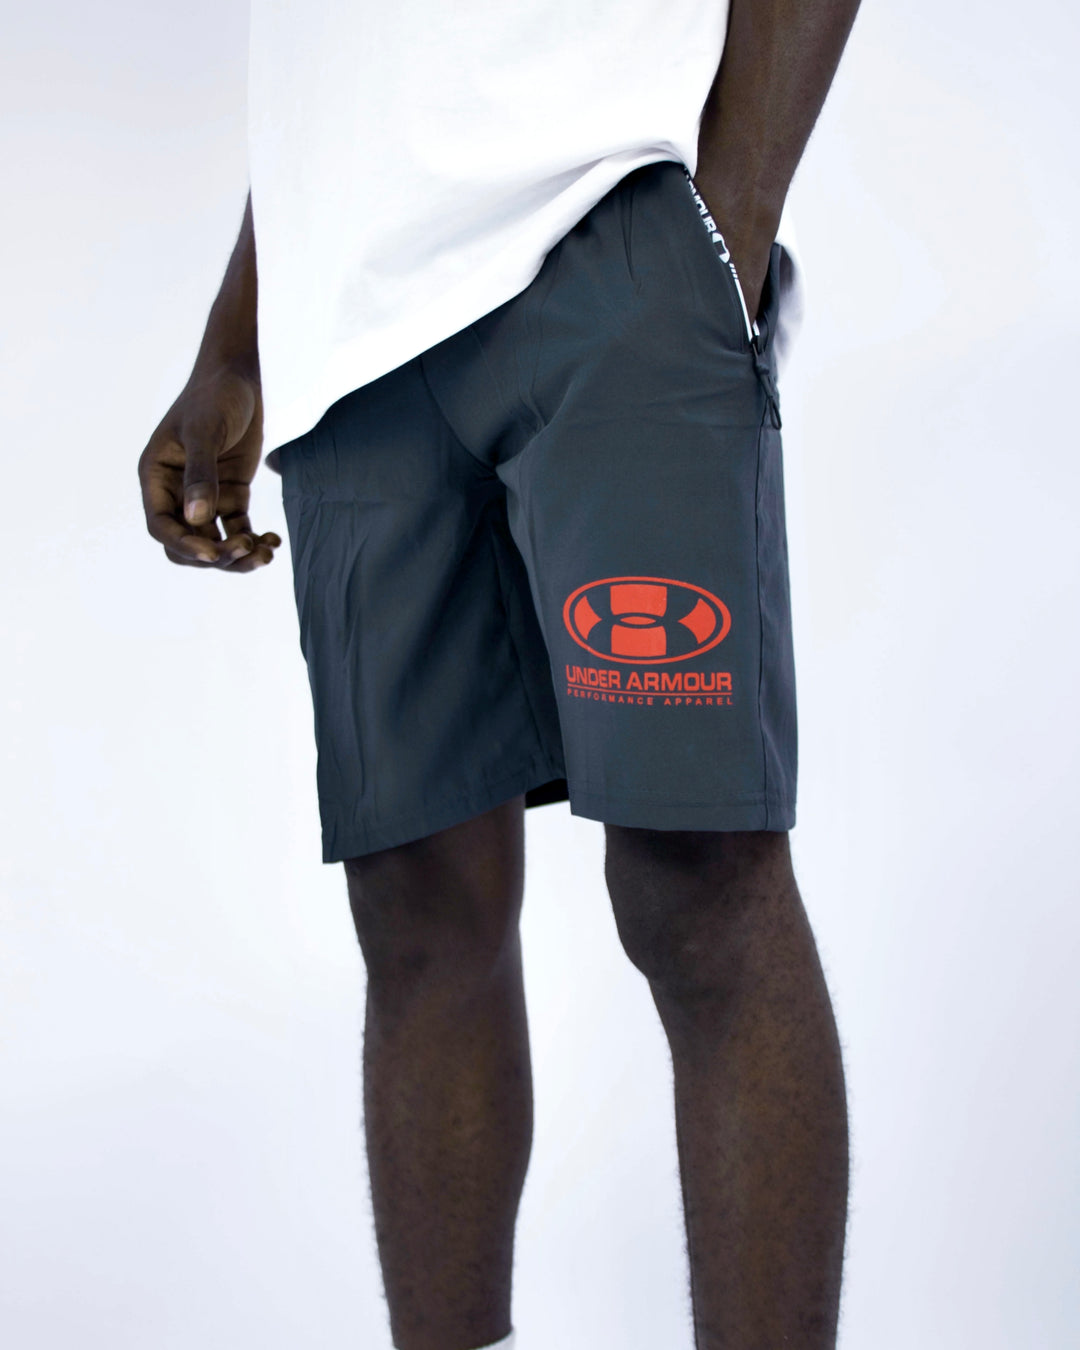 Under Armor Sports shorts with red patch